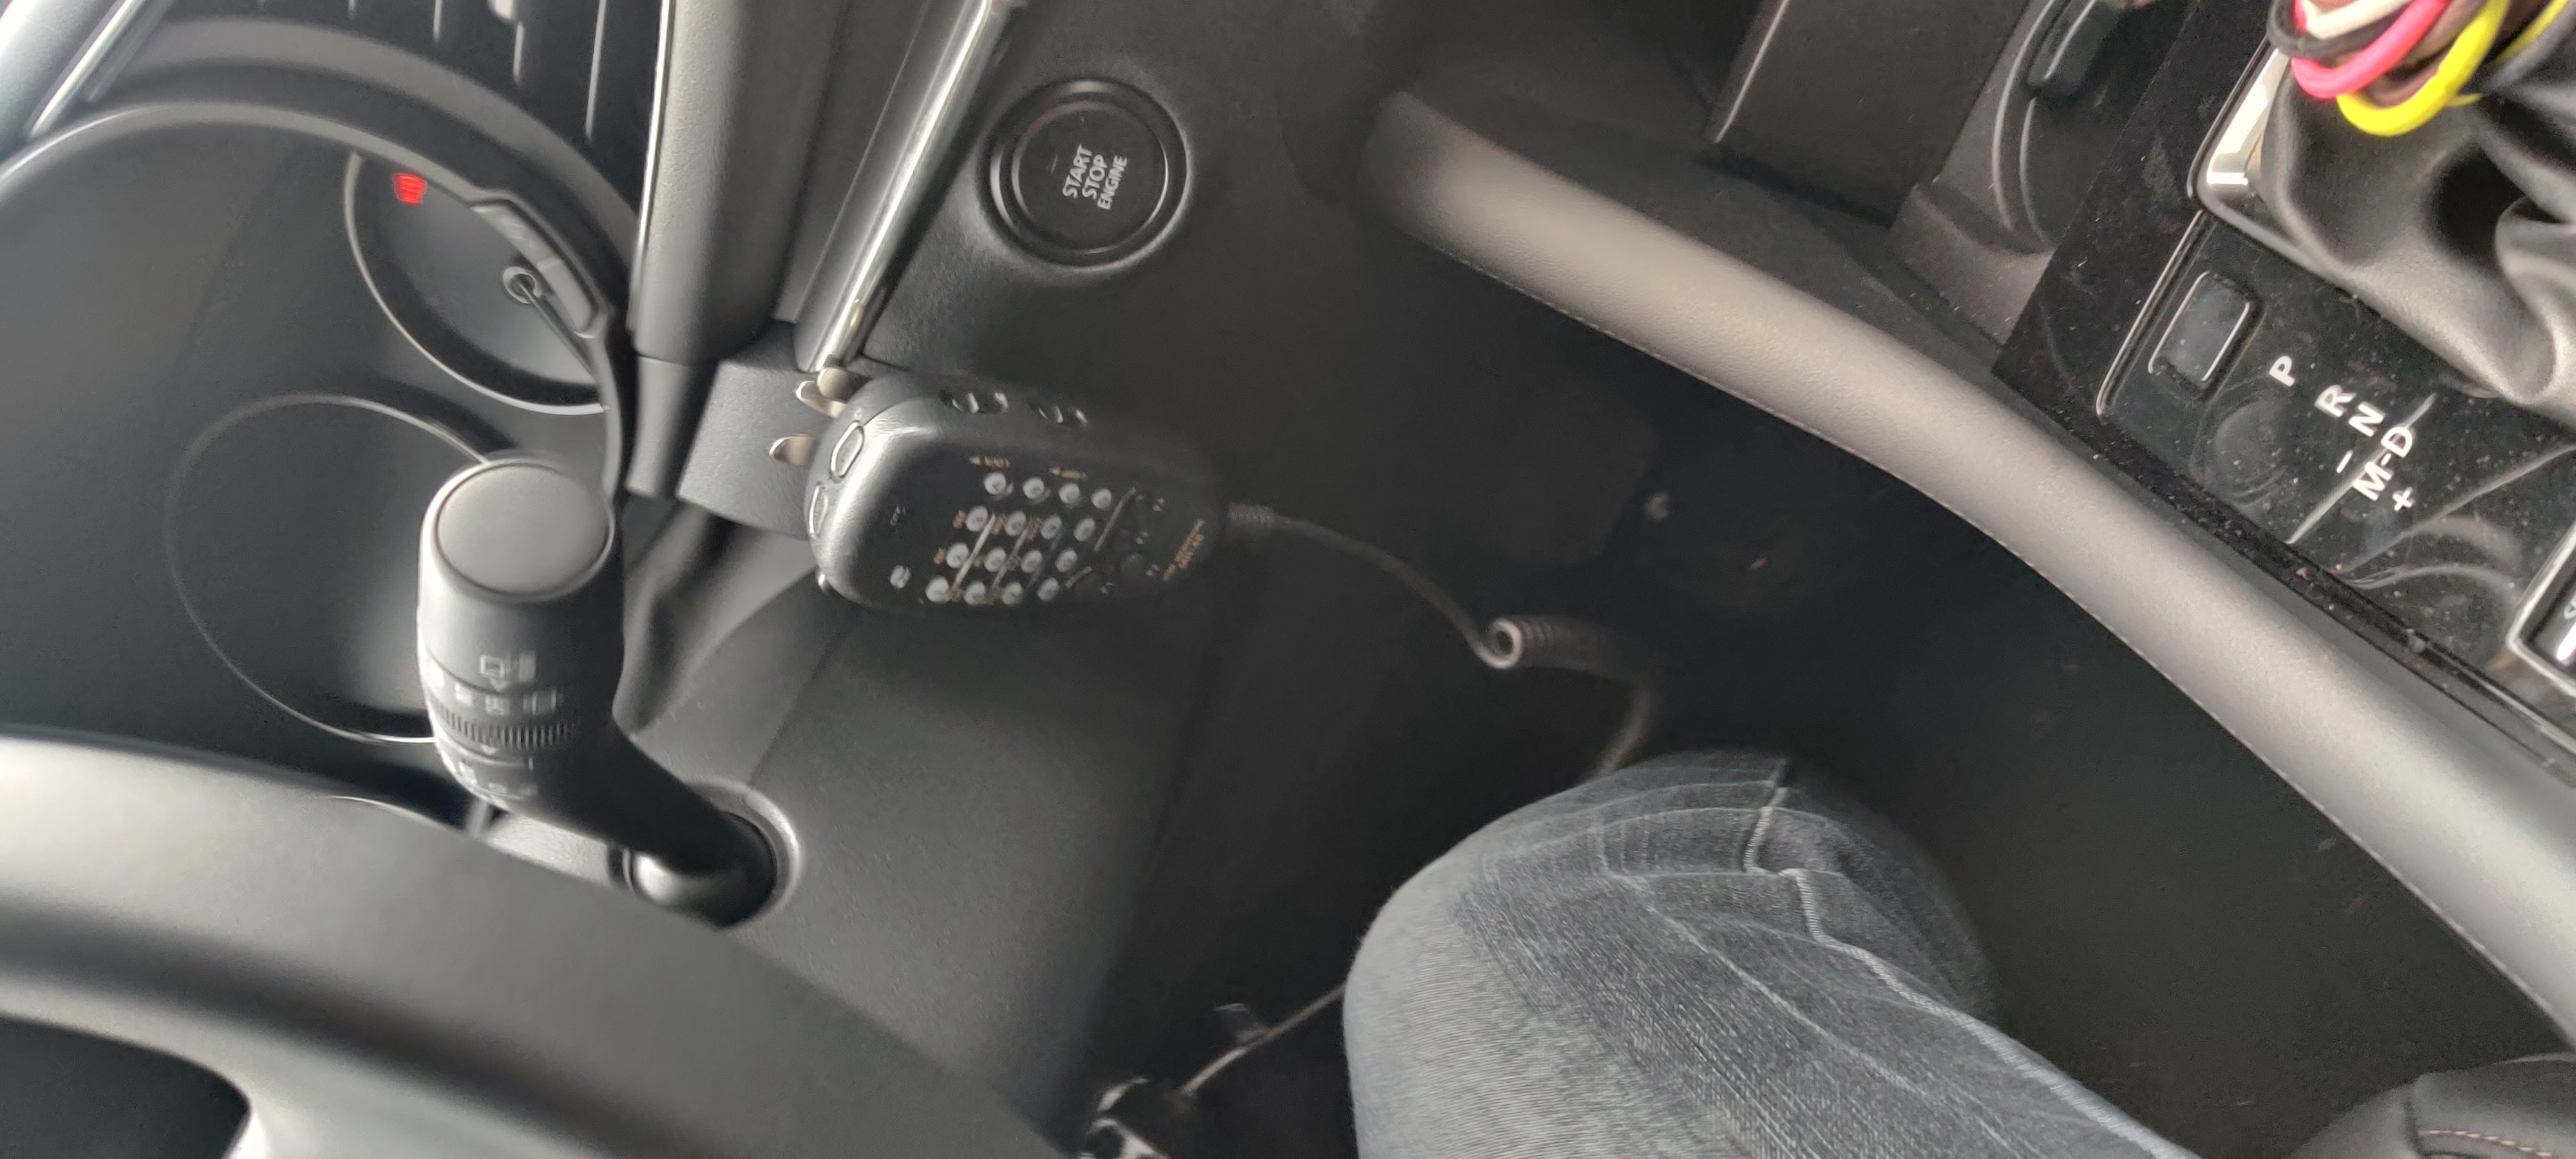 FT-8900R mic on right side of steering column, next to pushbutton ignition.